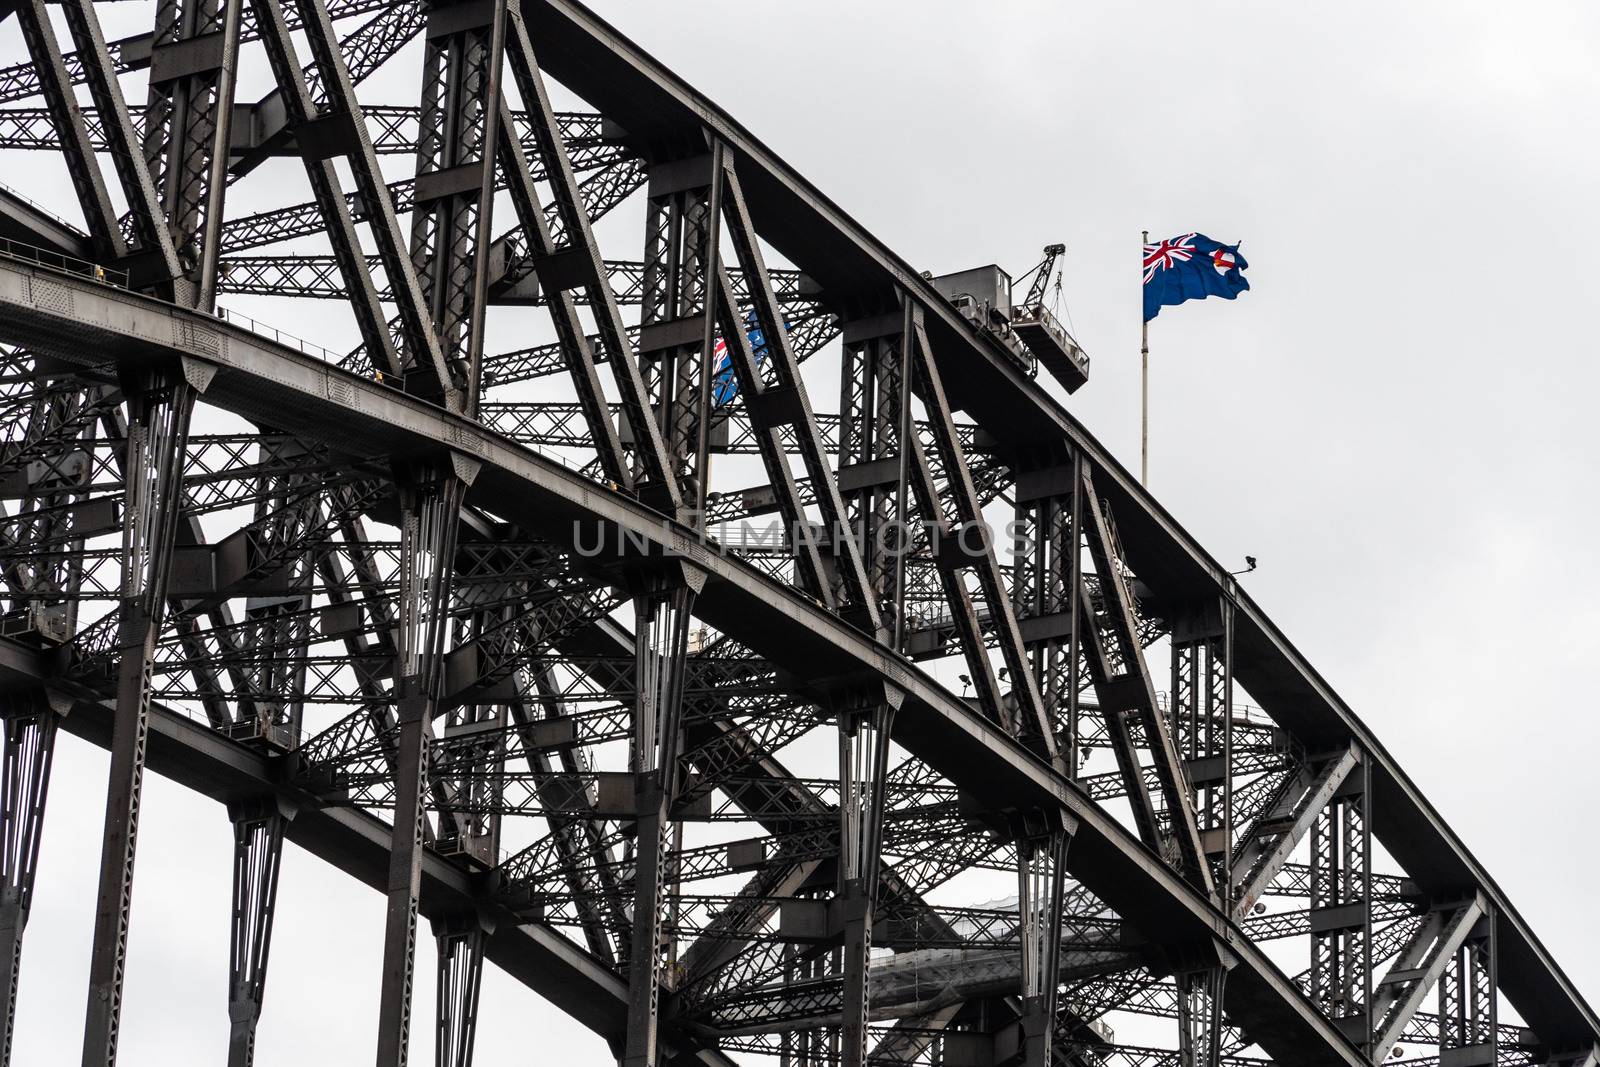 Close-up view of Harbour Bridge steel complex structure and the Australian flag on the top. Sydney, Australia